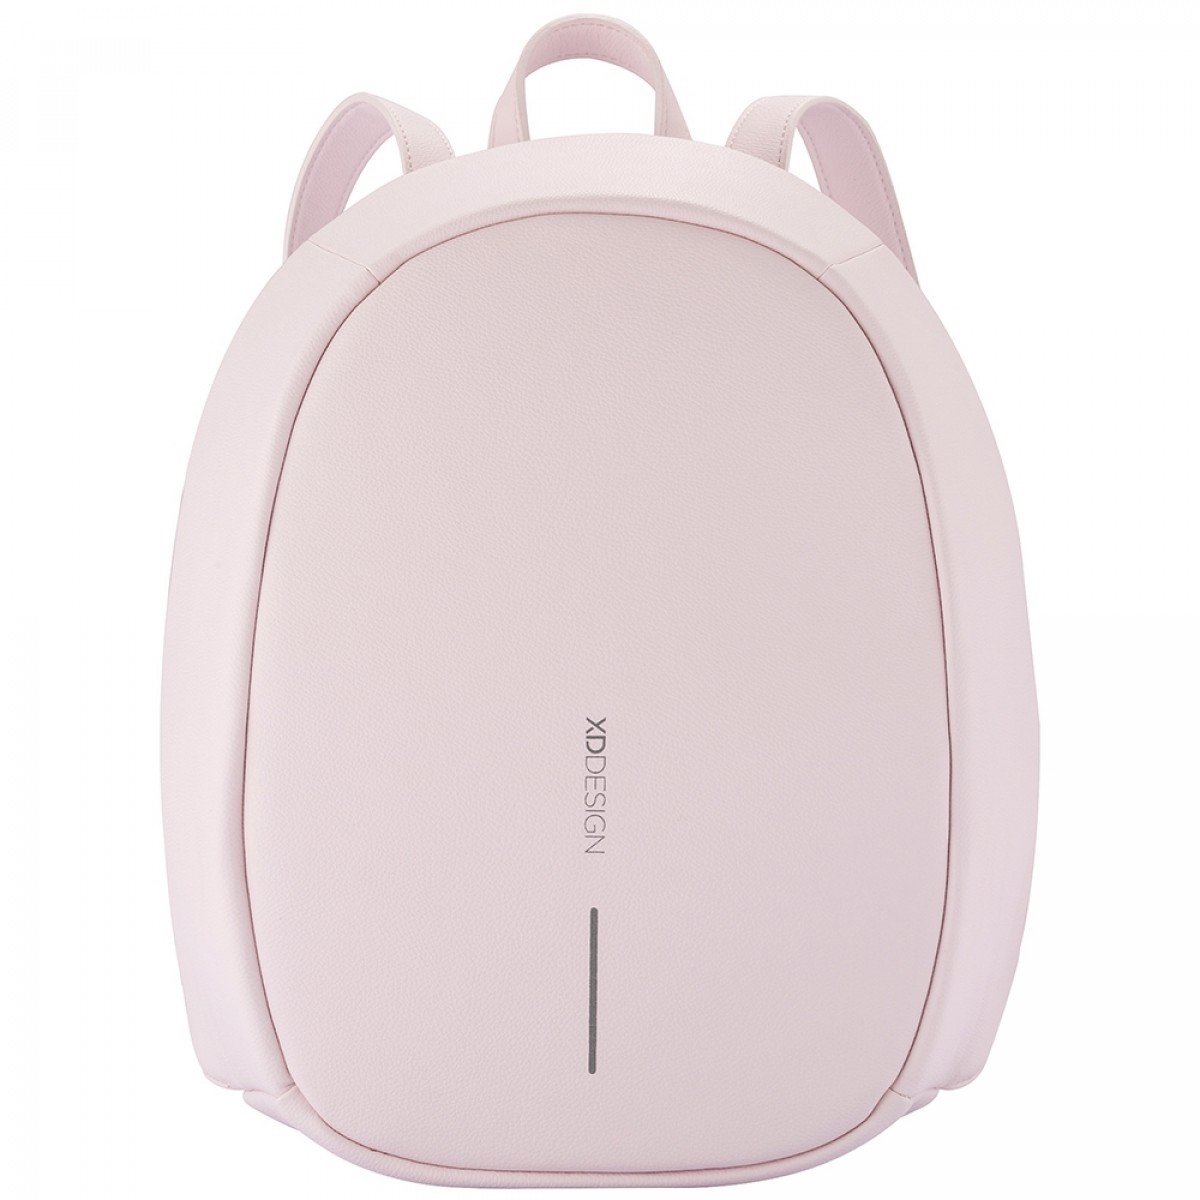 Bobby elle anti-theft backpack pink